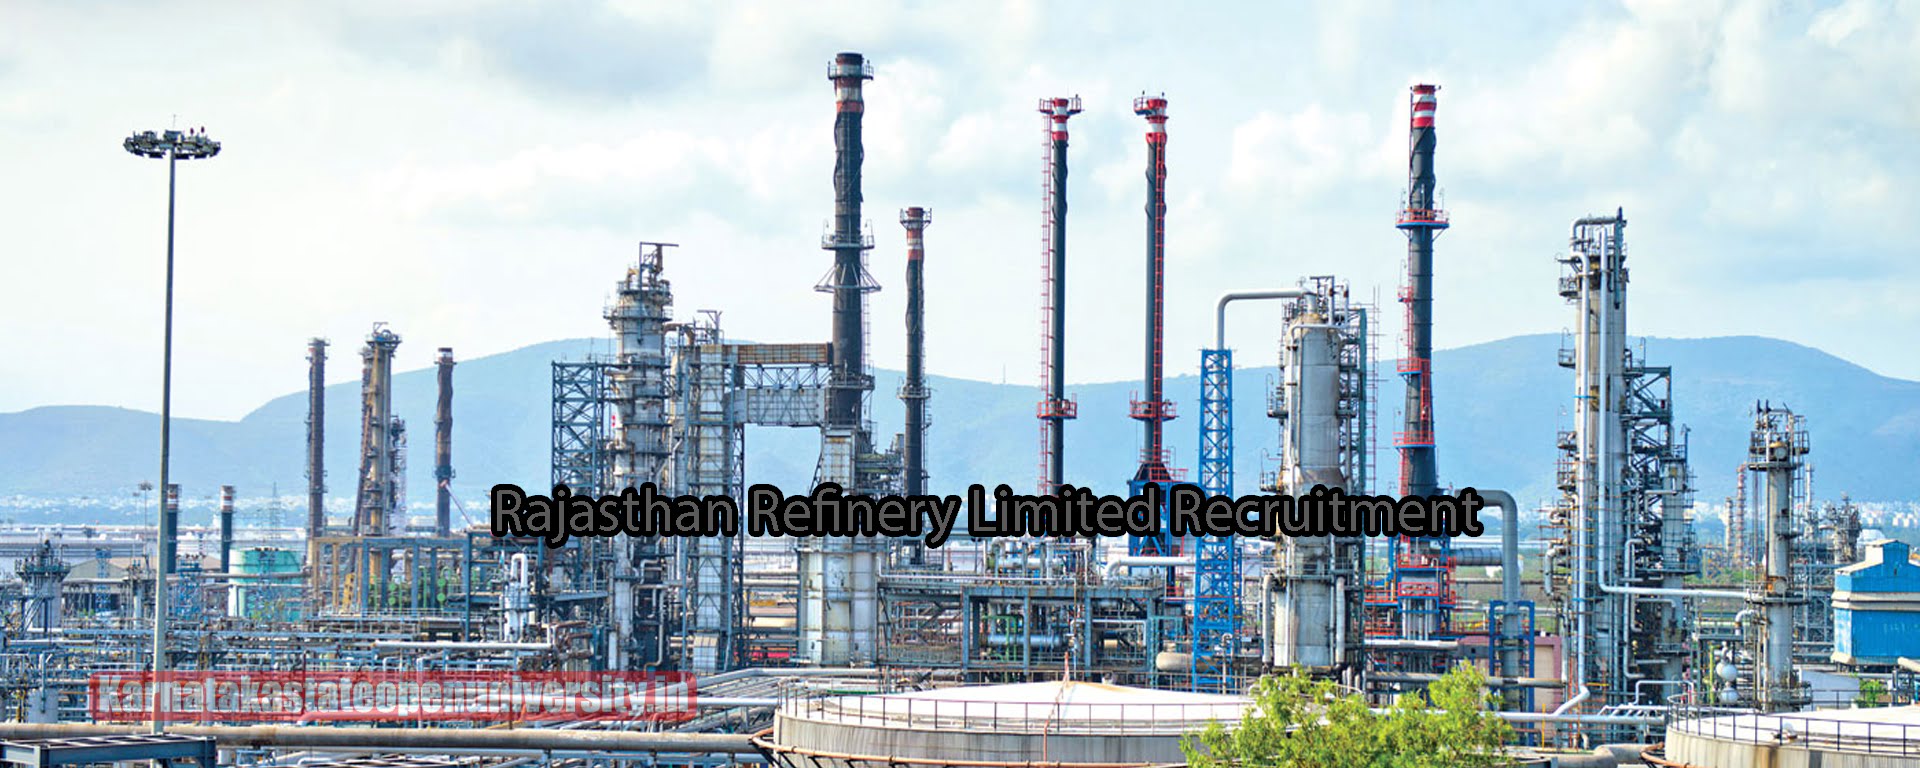 Rajasthan Refinery Limited Recruitment